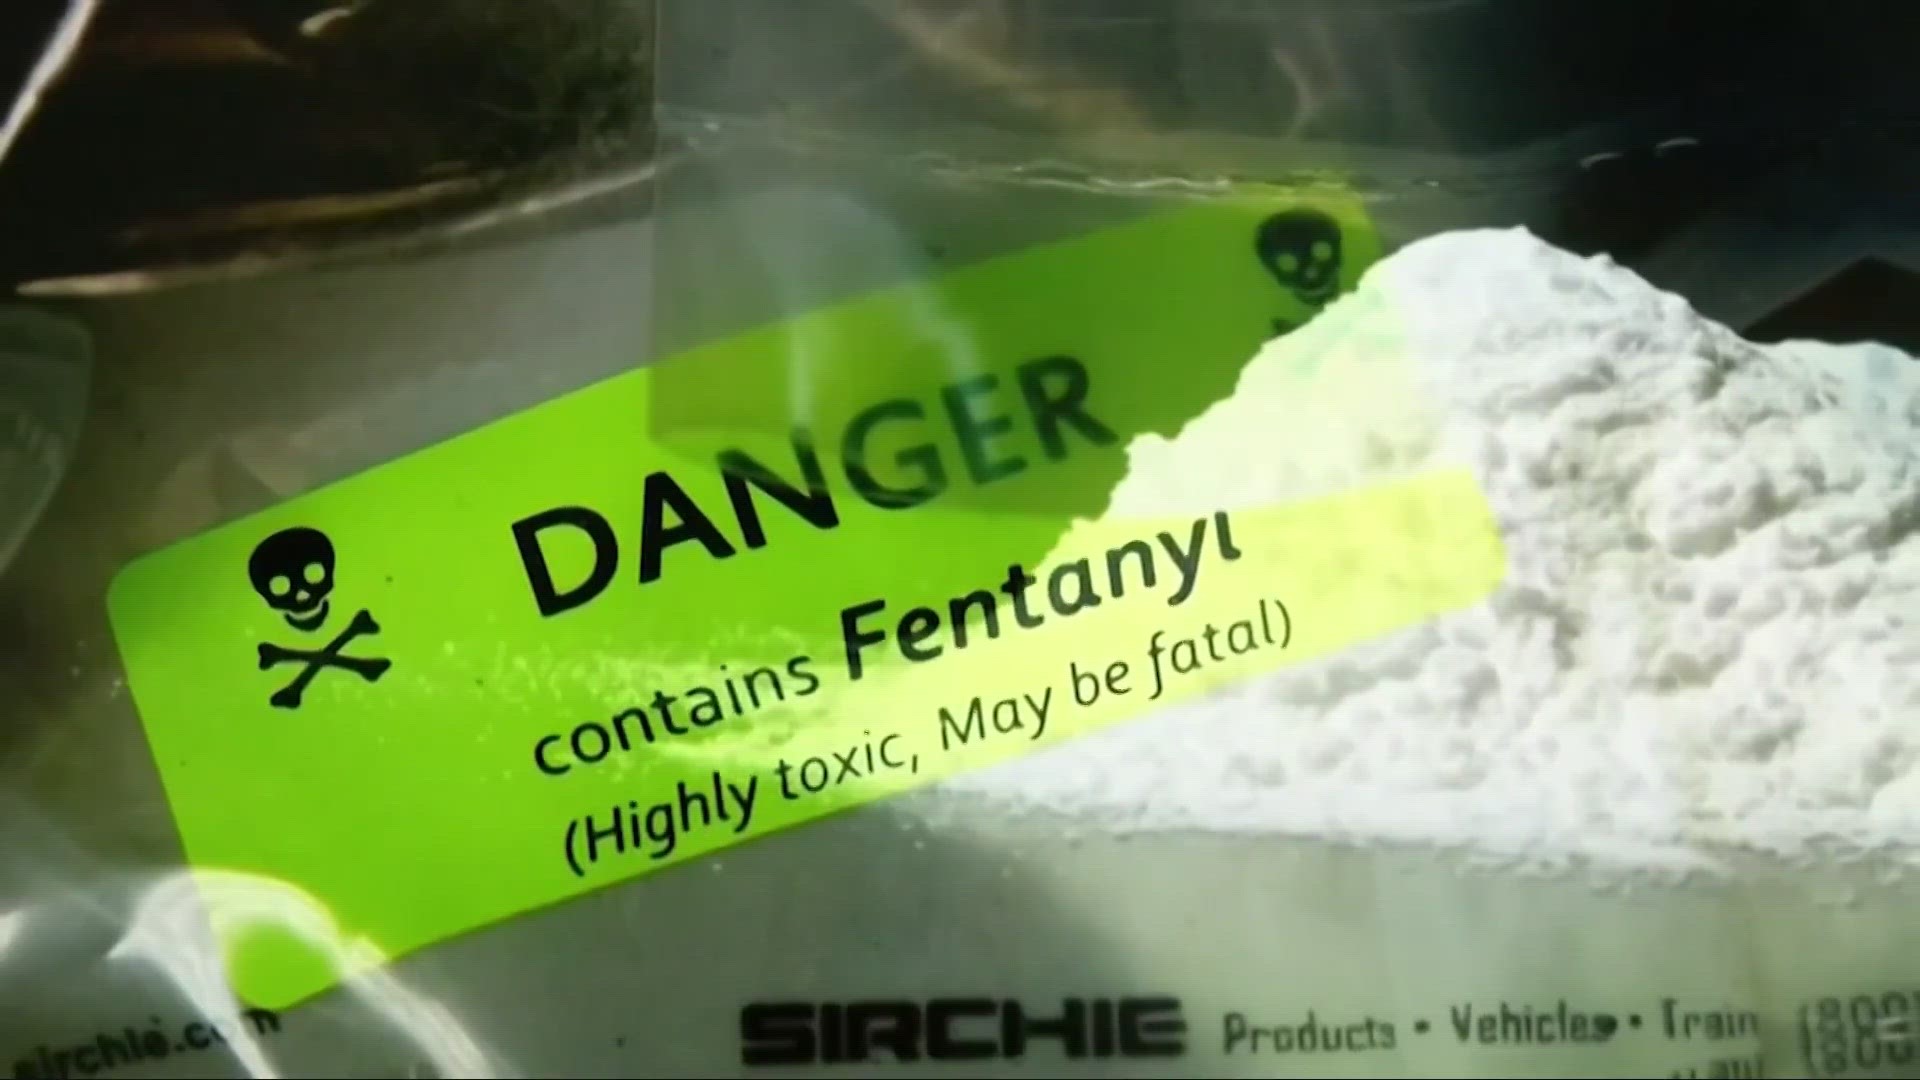 For the first time in Ohio, a group called Fentanyl Fathers gave a presentation to more than 600 students on the dangers of fentanyl.